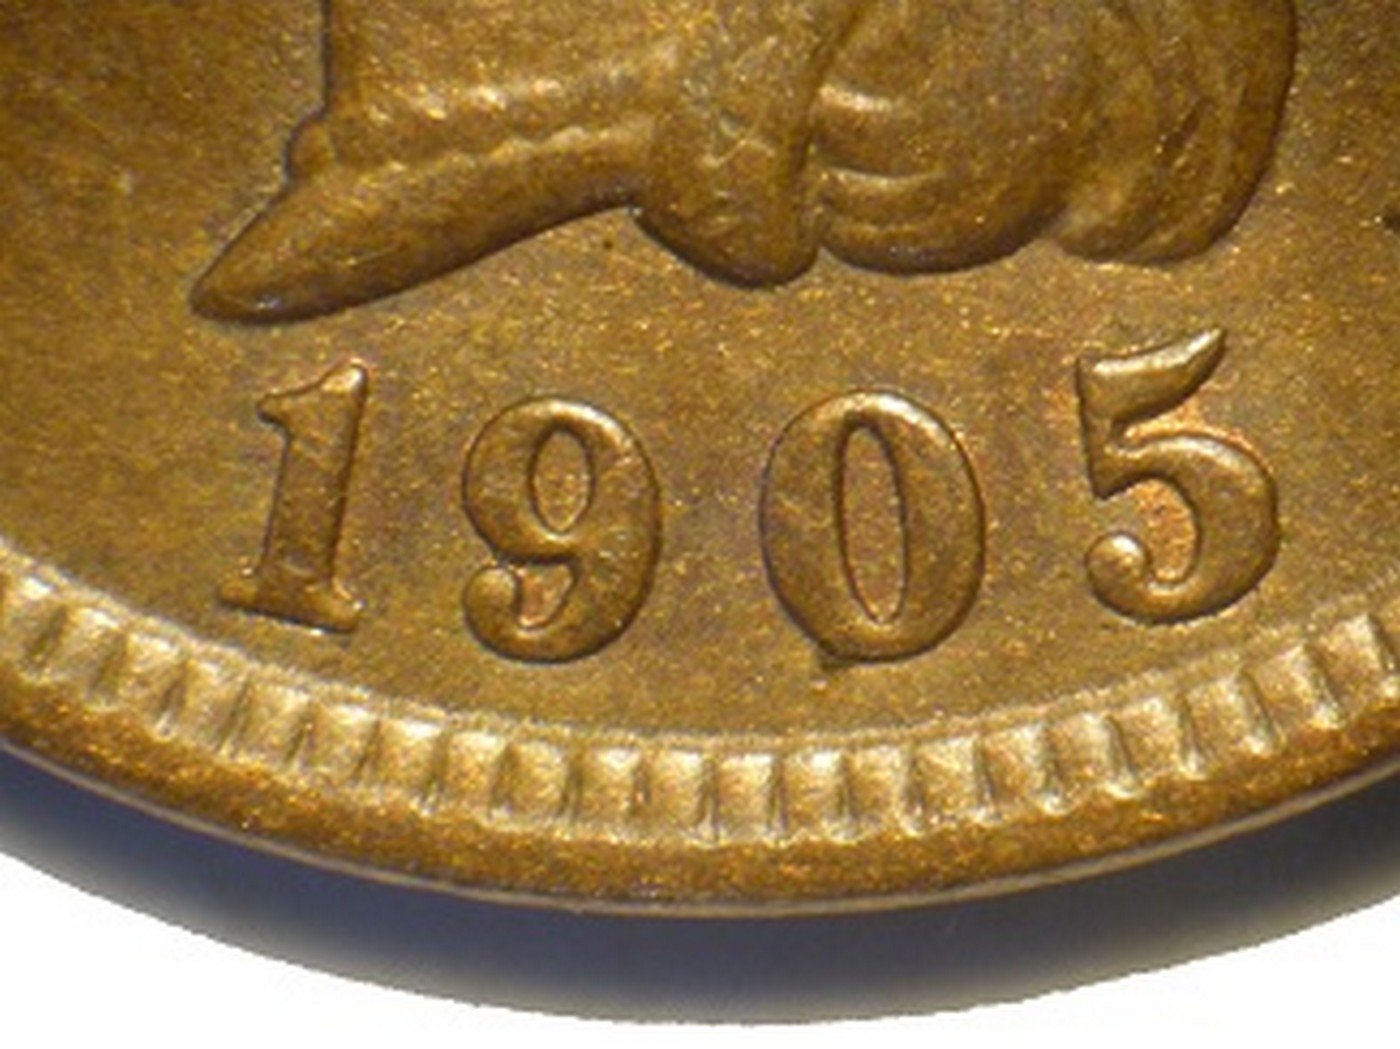 1905 RPD-025 - Indian Head Cent - Photo by David Poliquin